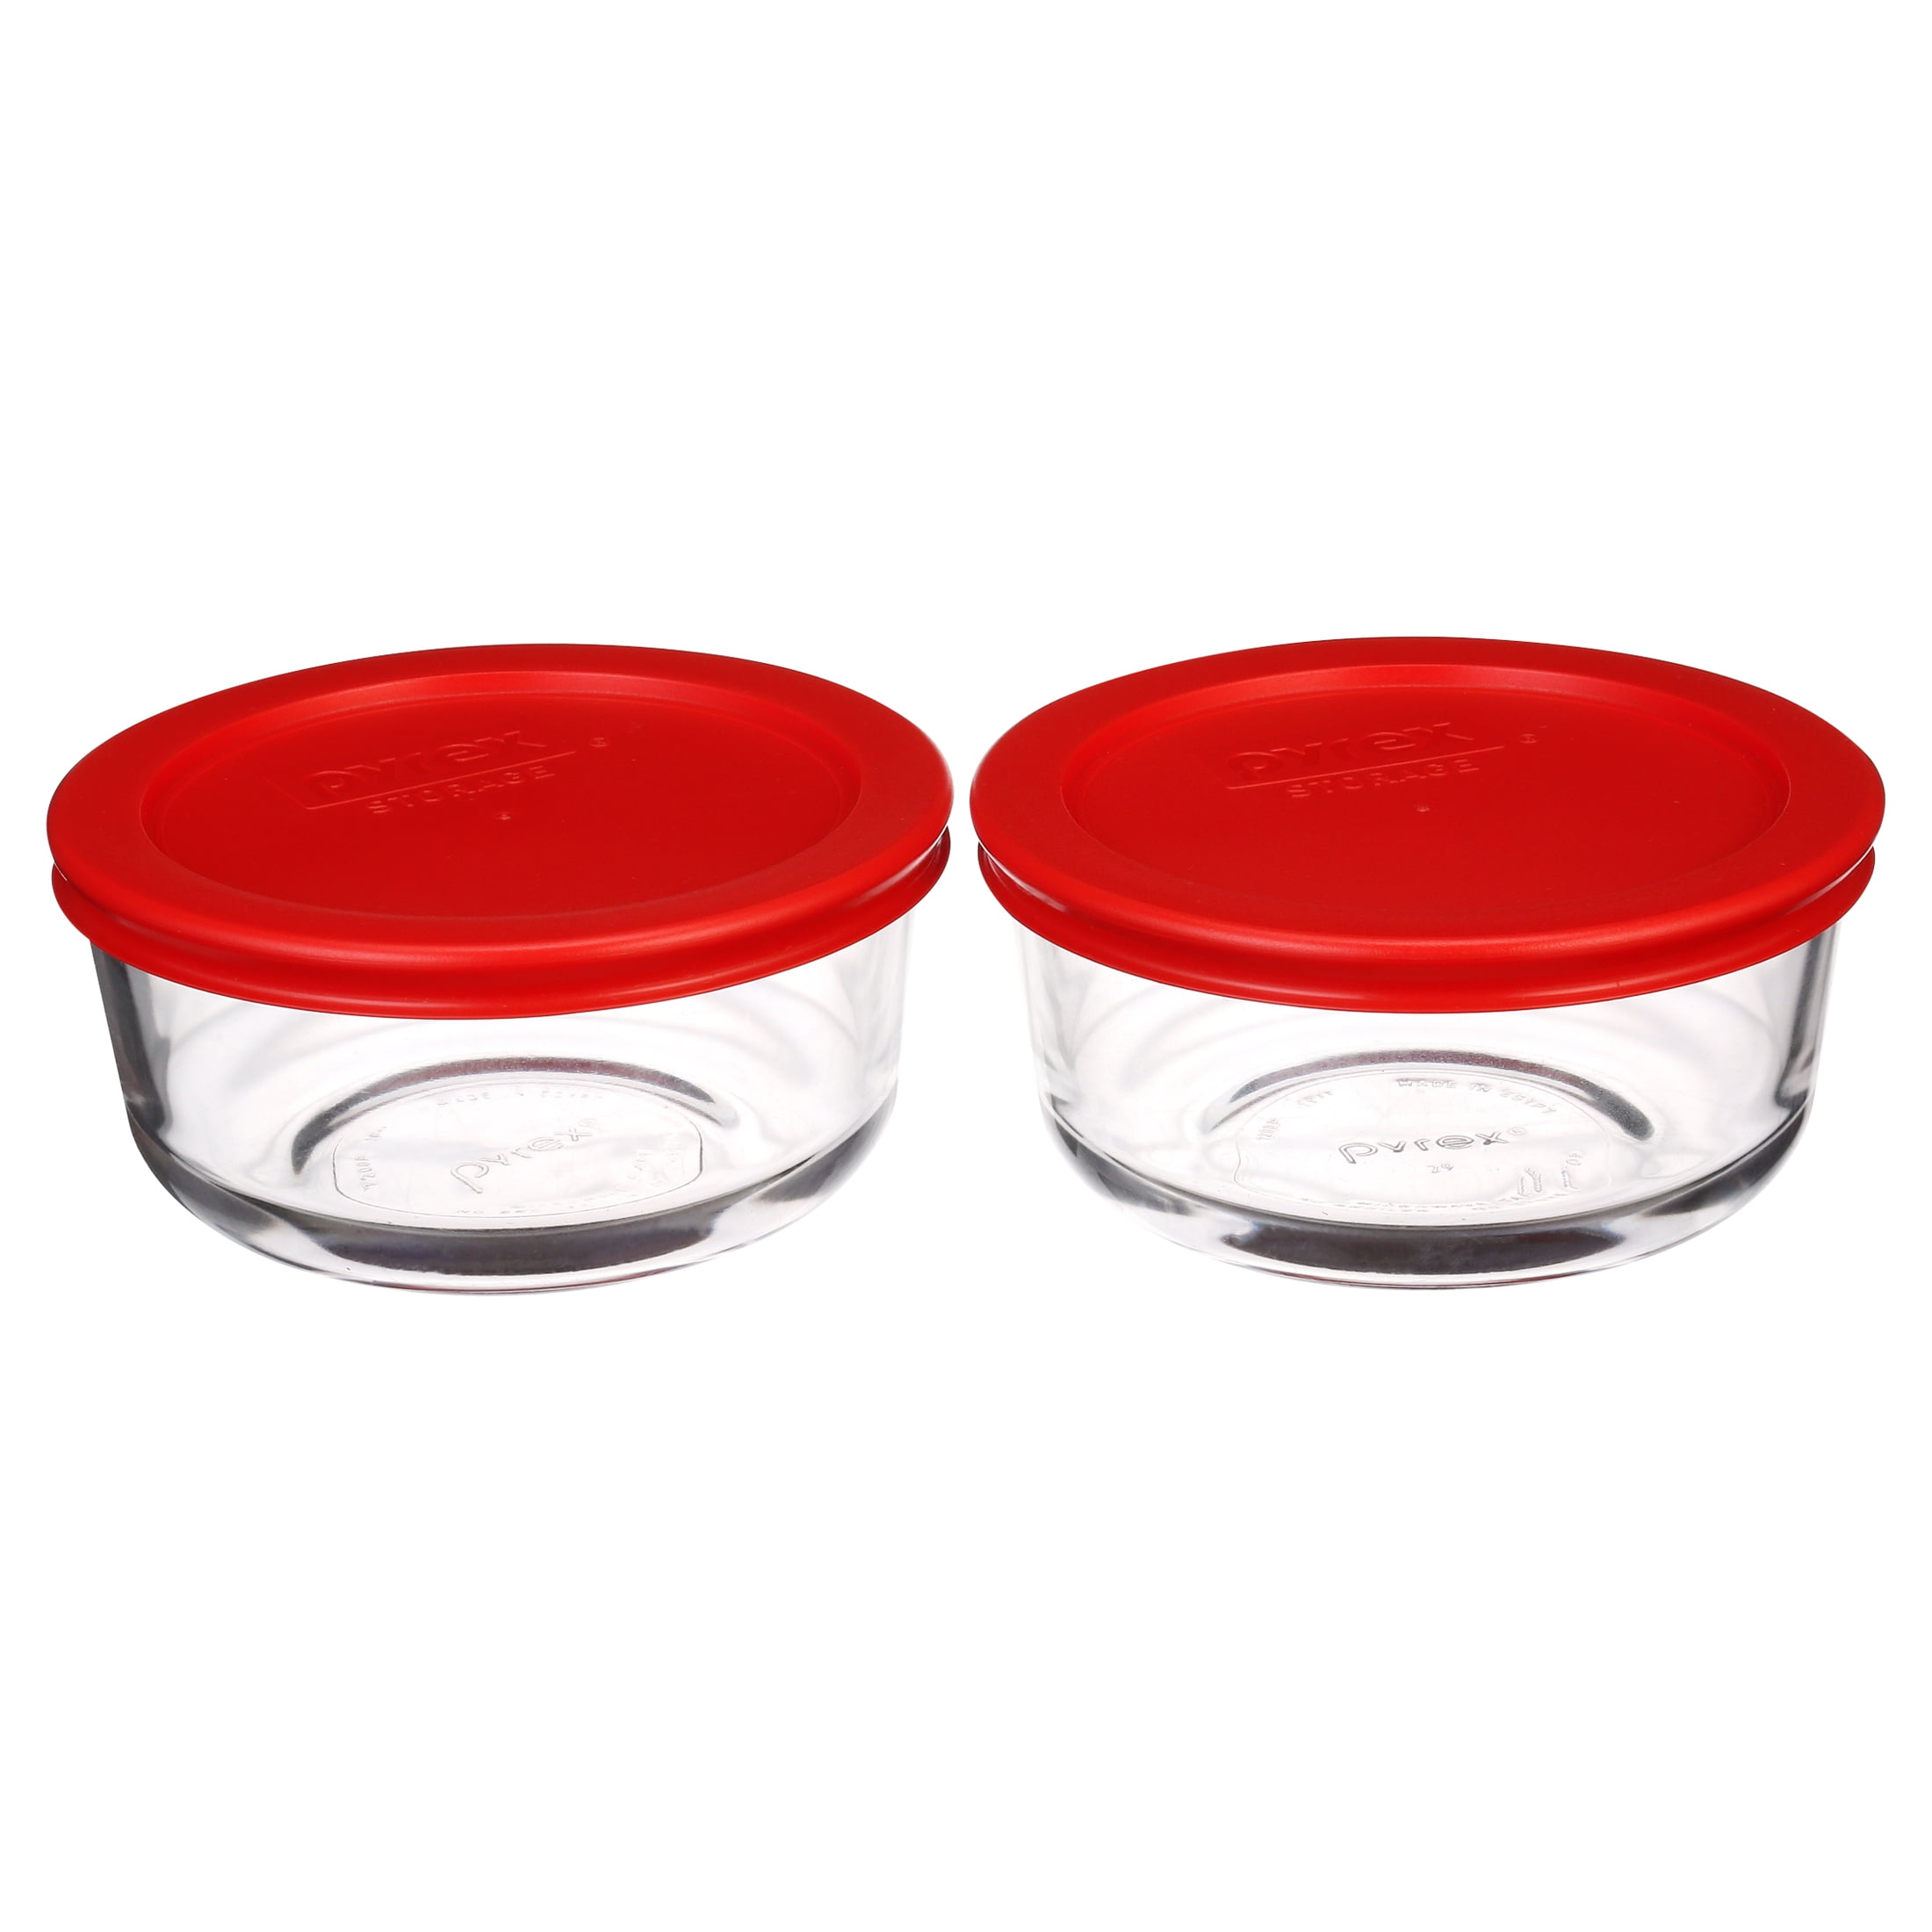 Pyrex Round Storage Containers with Lids - Red, 3 pk - Ralphs